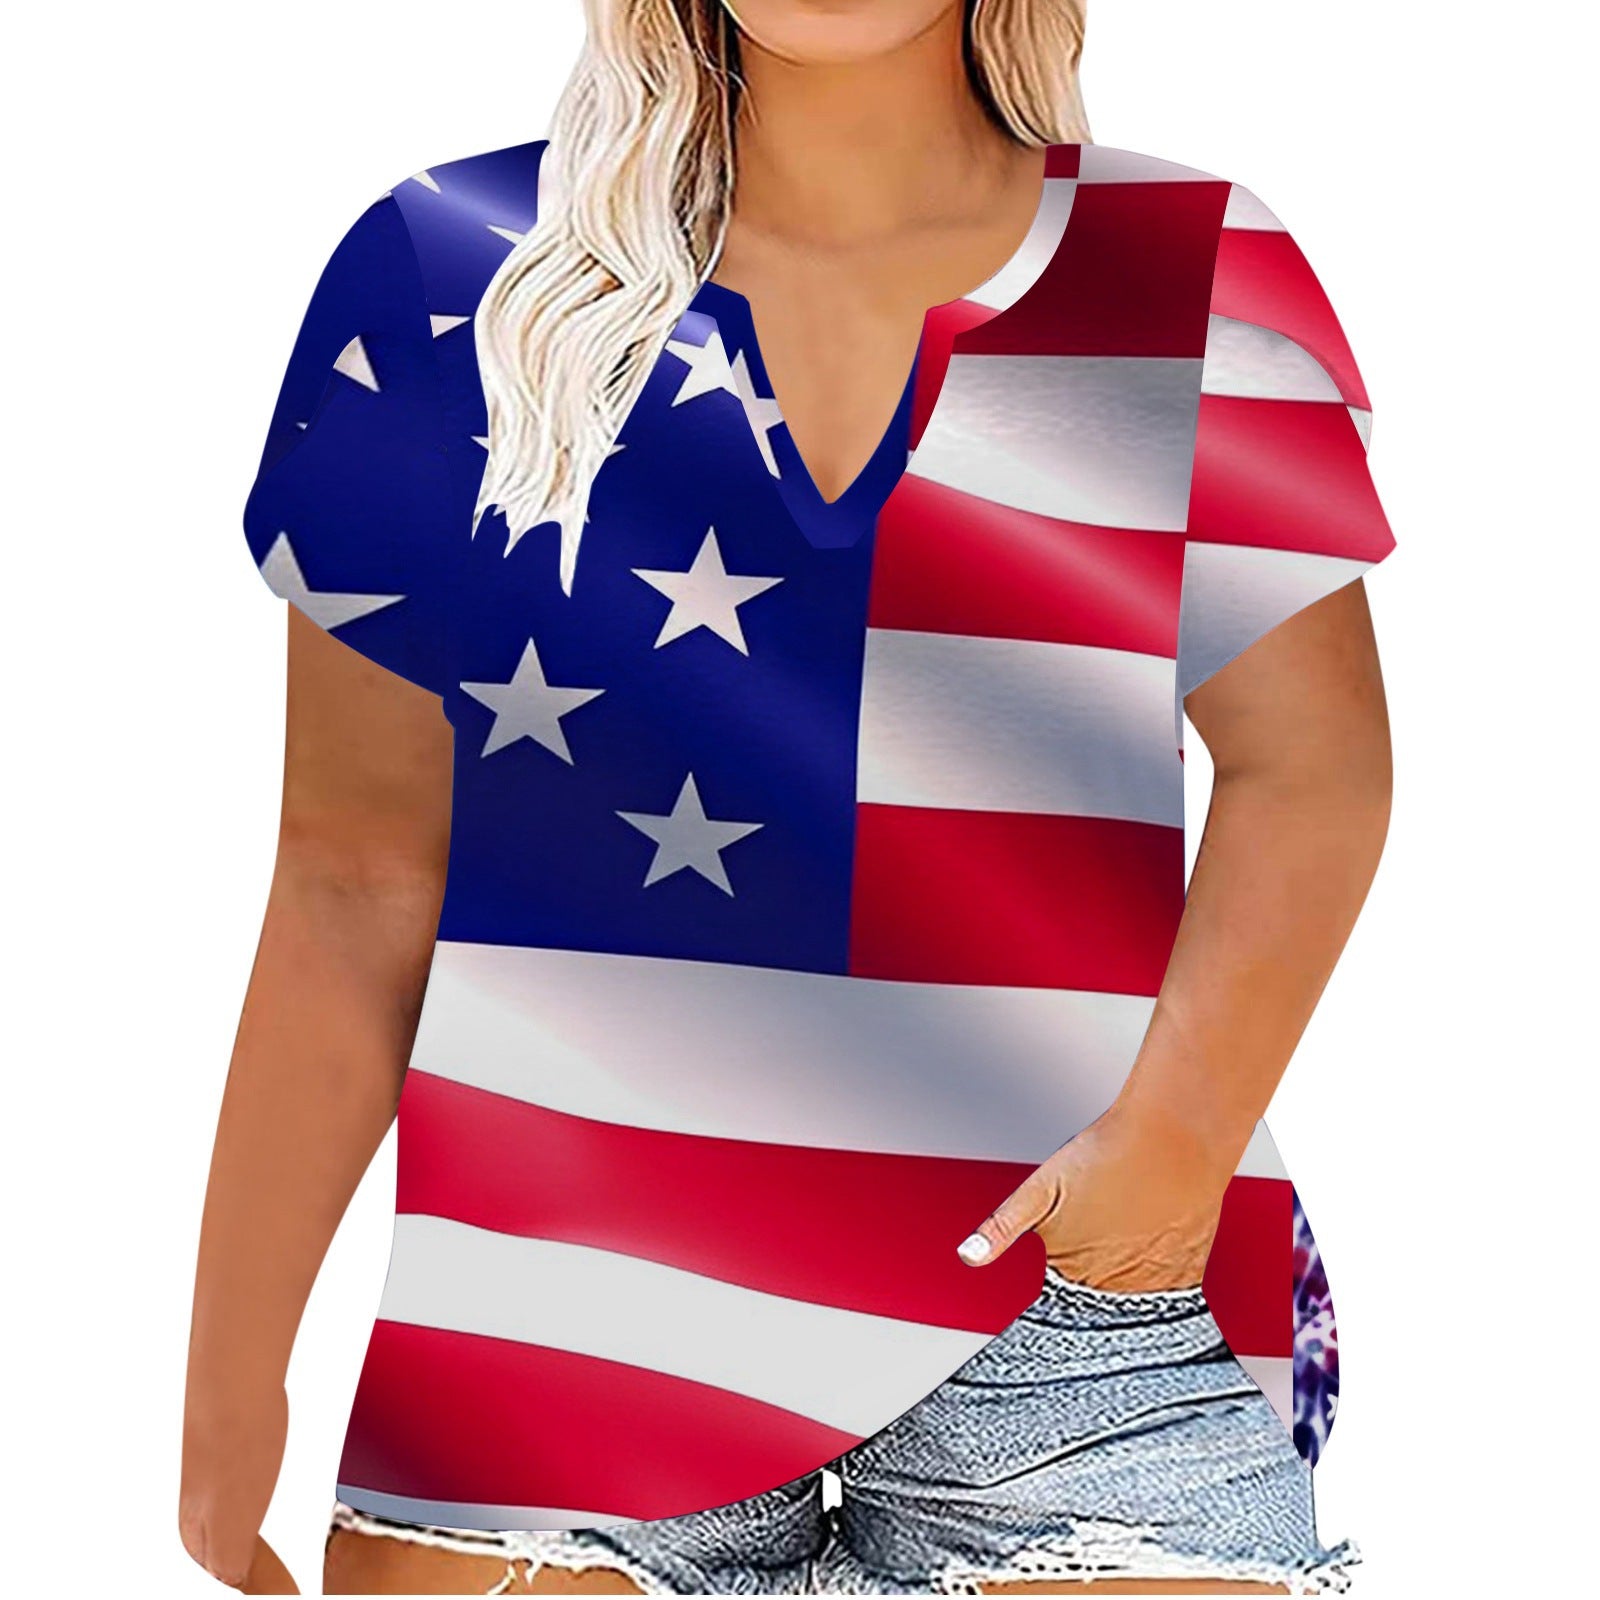 Women's Independence Day Printed Summer Short-sleeved T-shirt Plus Size